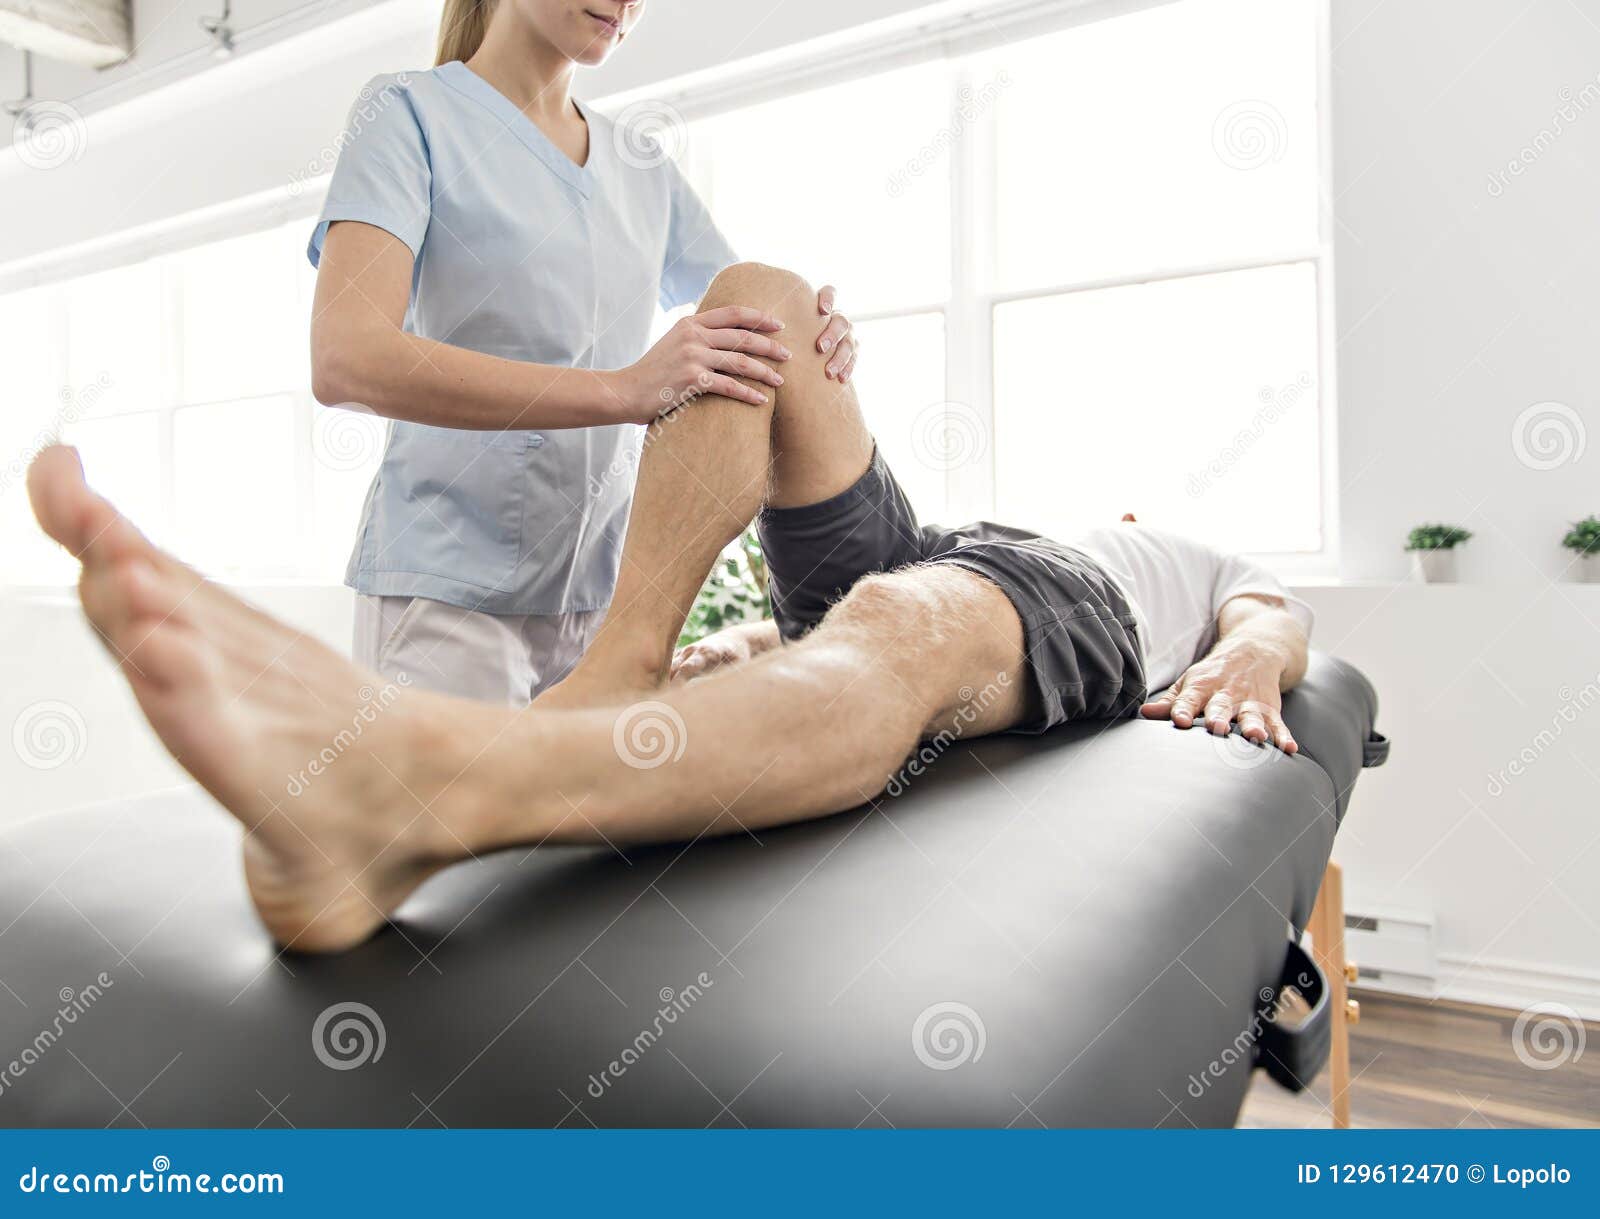 patient at the physiotherapy doing physical exercises with his therapist